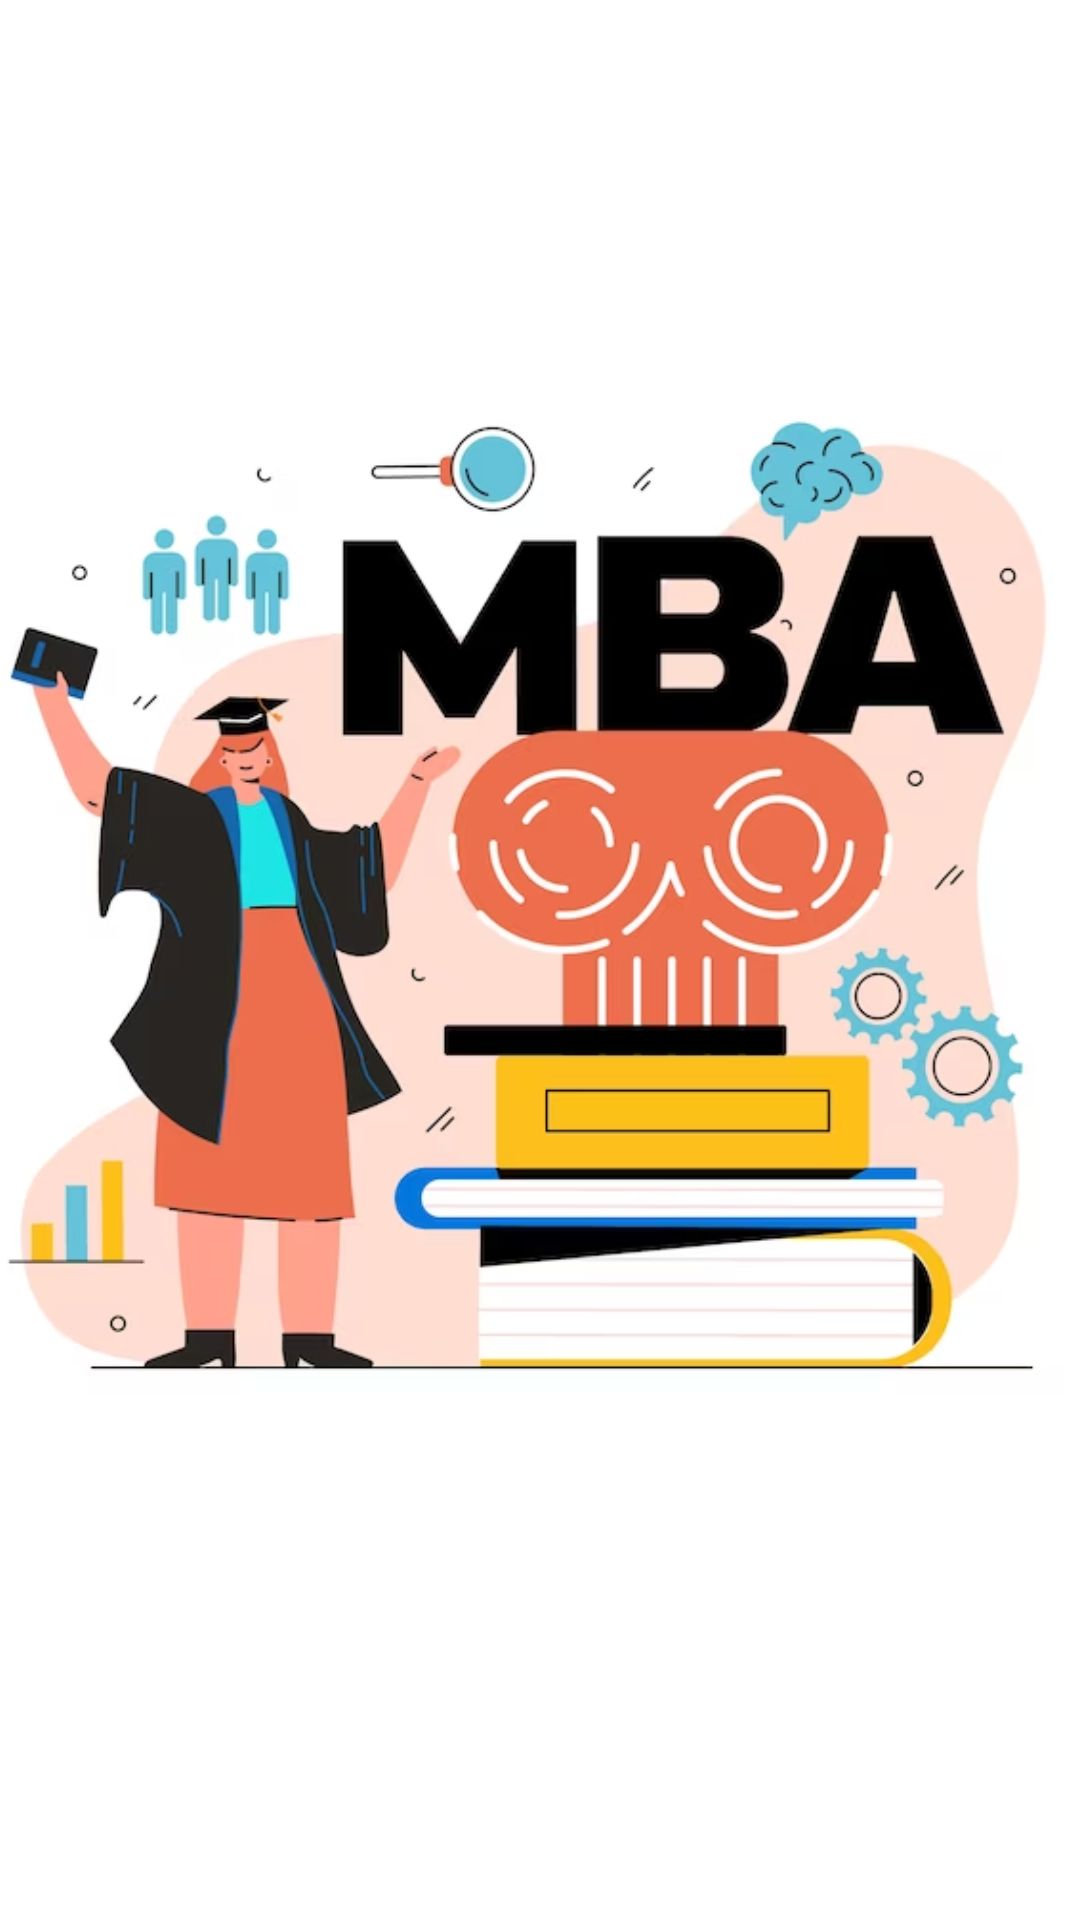 Top 10 MBA colleges in India as per NIRF ranking